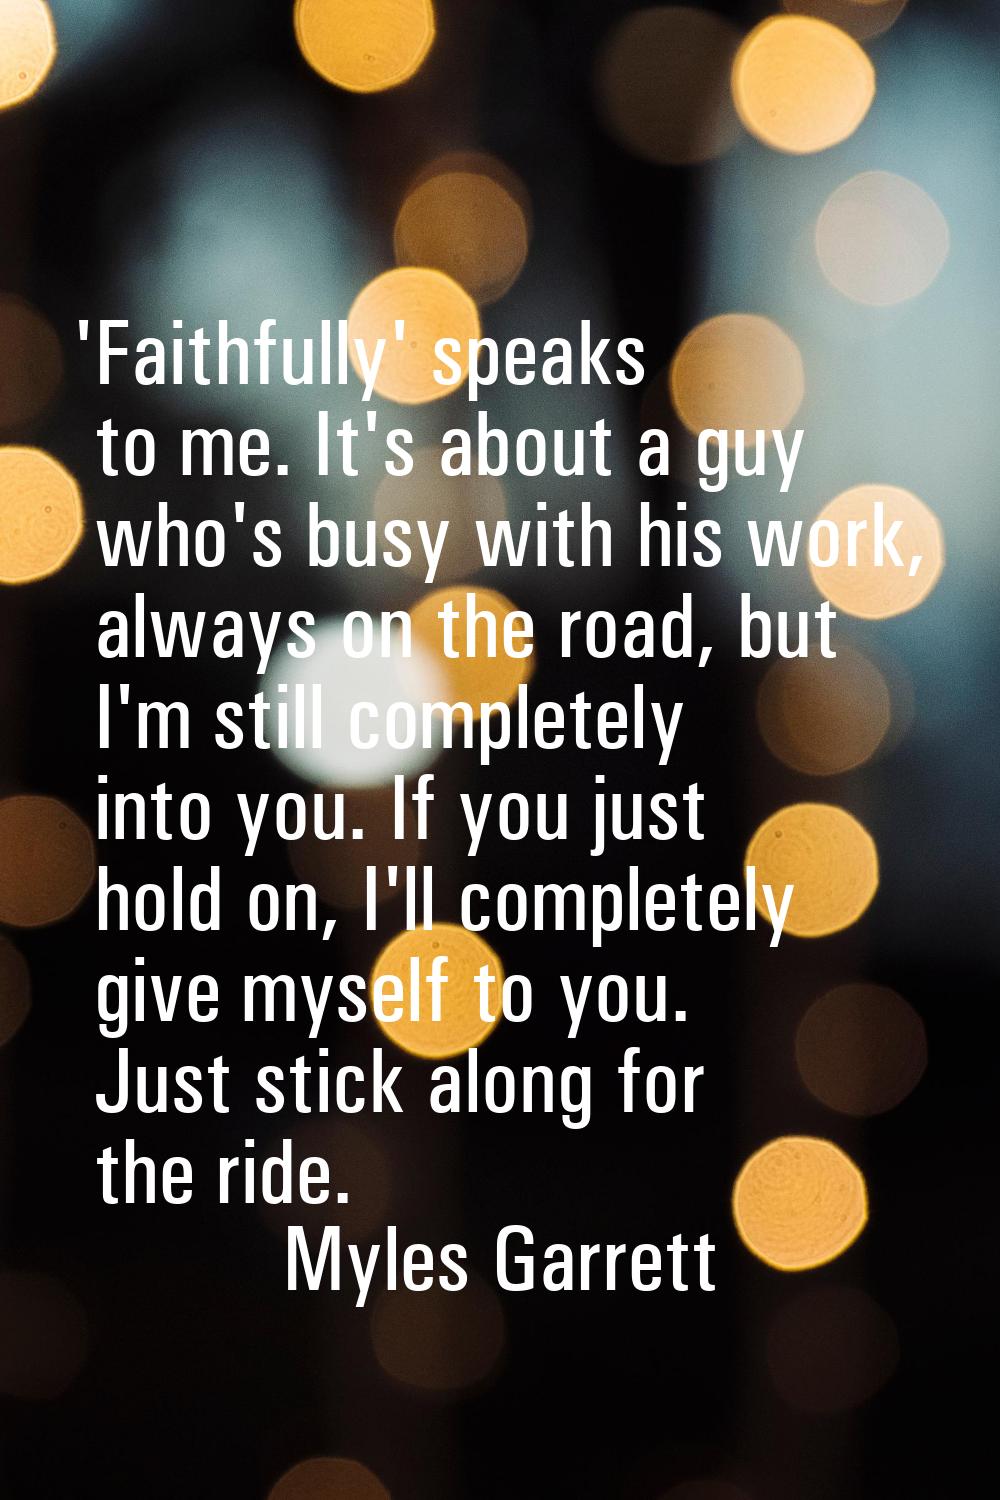 'Faithfully' speaks to me. It's about a guy who's busy with his work, always on the road, but I'm s